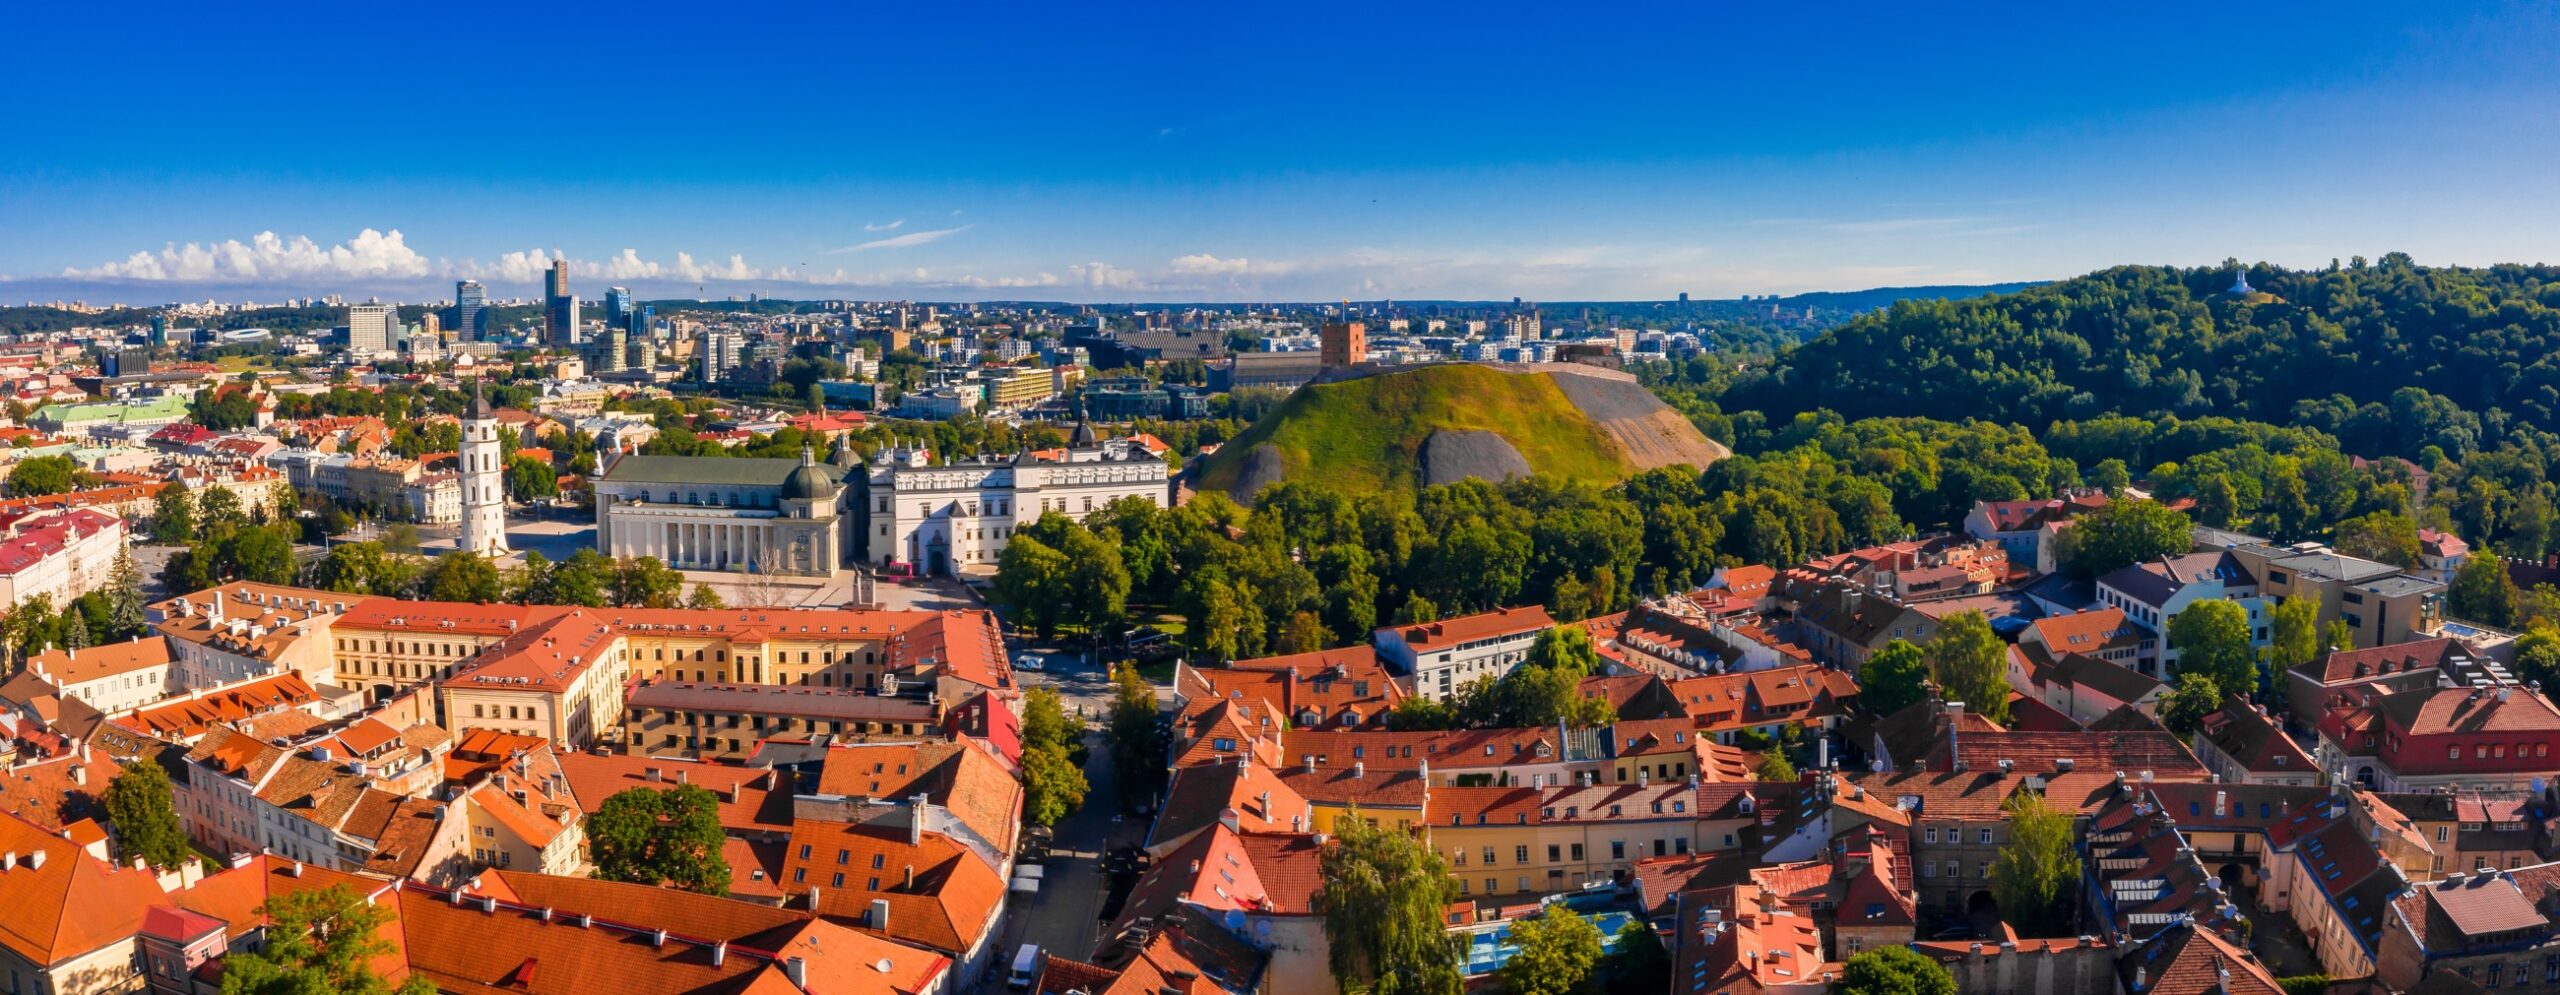 Vilnius – A Dreamy City with Plenty to Offer: Top Things to Do